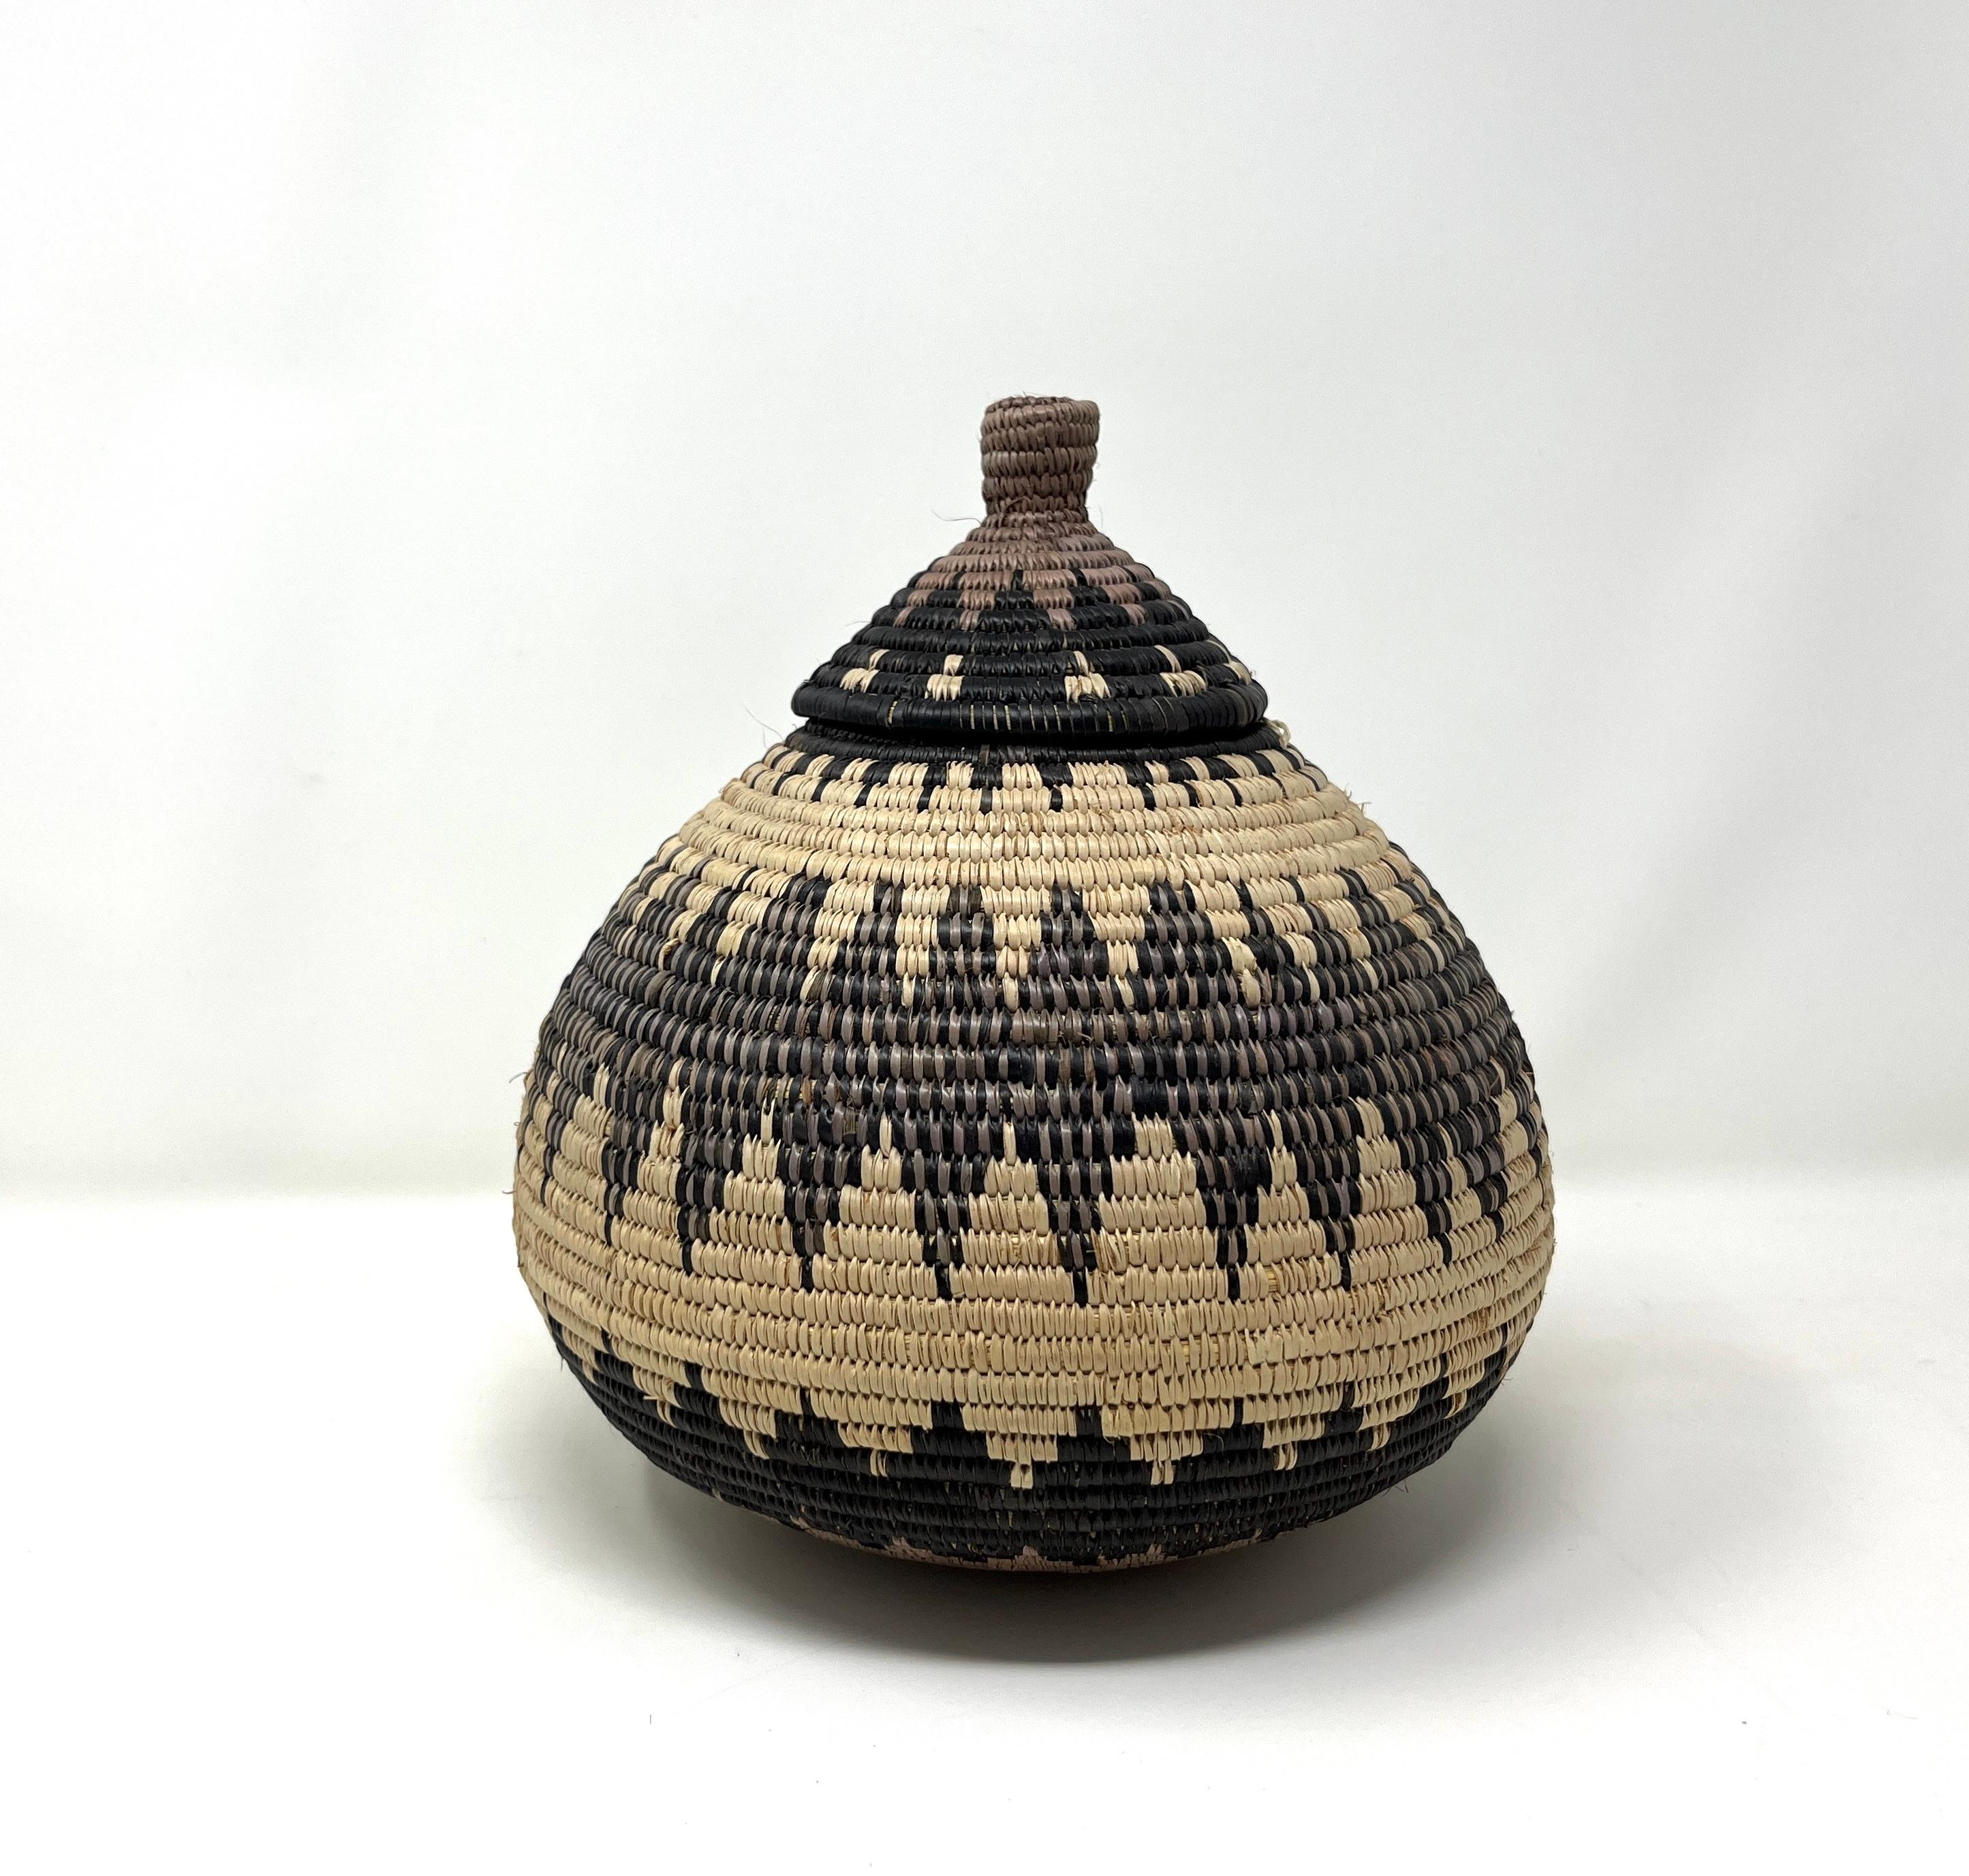 Tribal South African Zulu Basket with Lid, Geometric Handmade Basketry For Sale